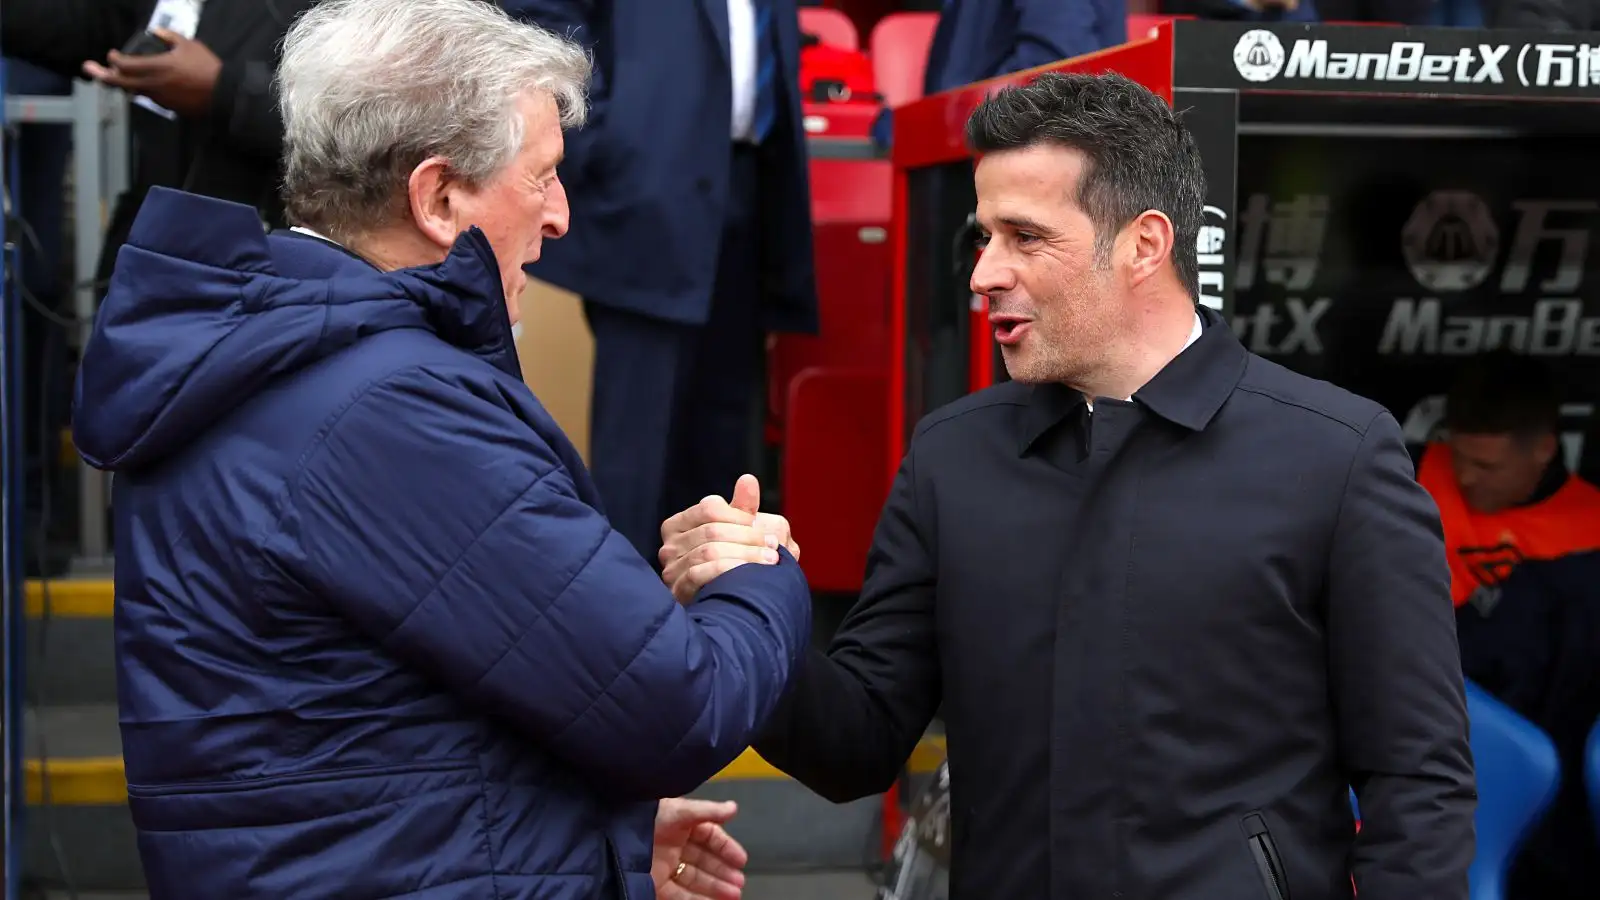 Fulham manager Marco Silva shakes hands with Crystal Palace manager Roy Hodgson before a game